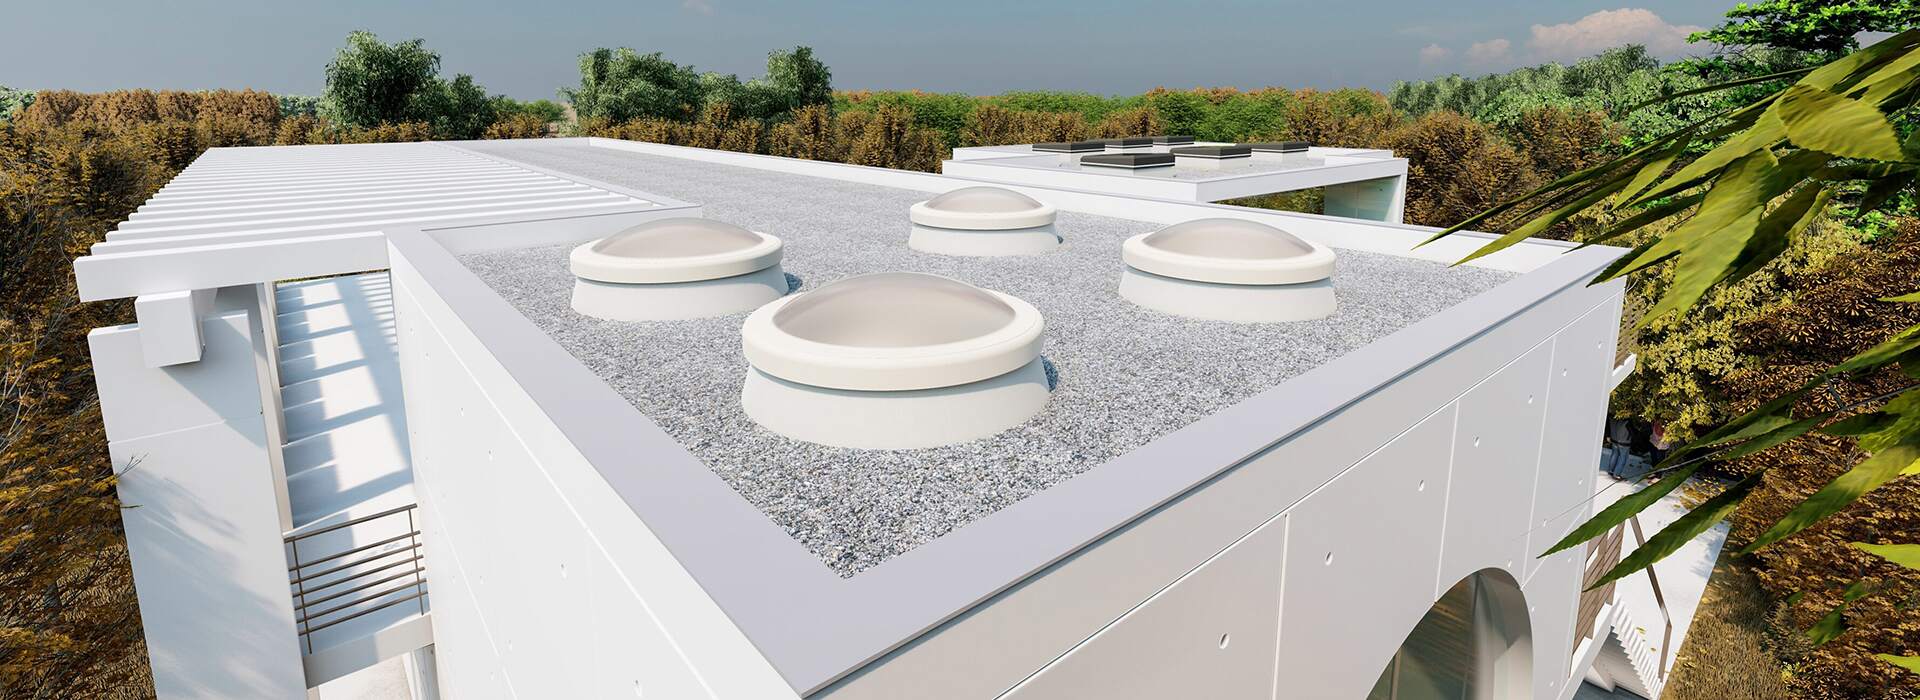 4 circular rooflights on a roof